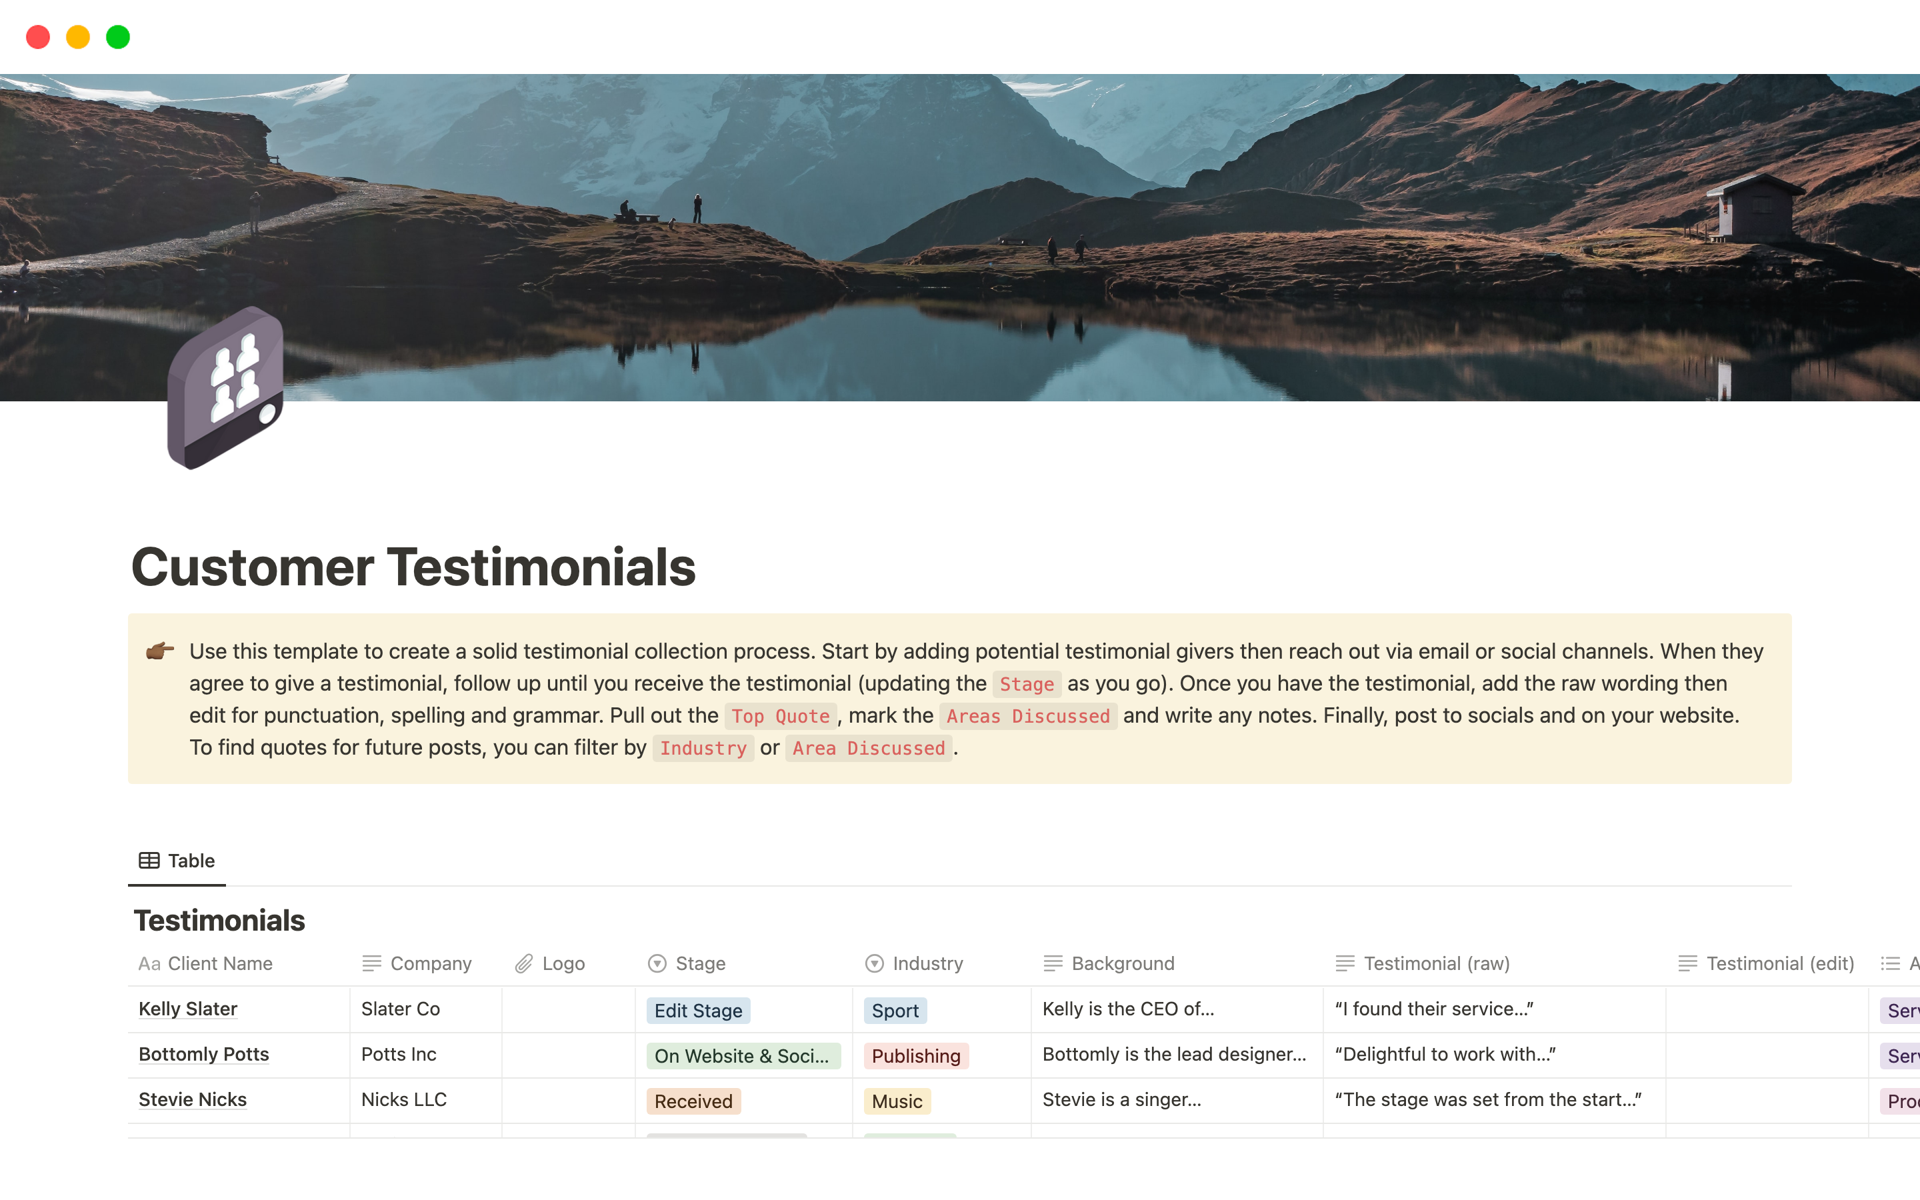 Use this template to create a solid testimonial collection process.